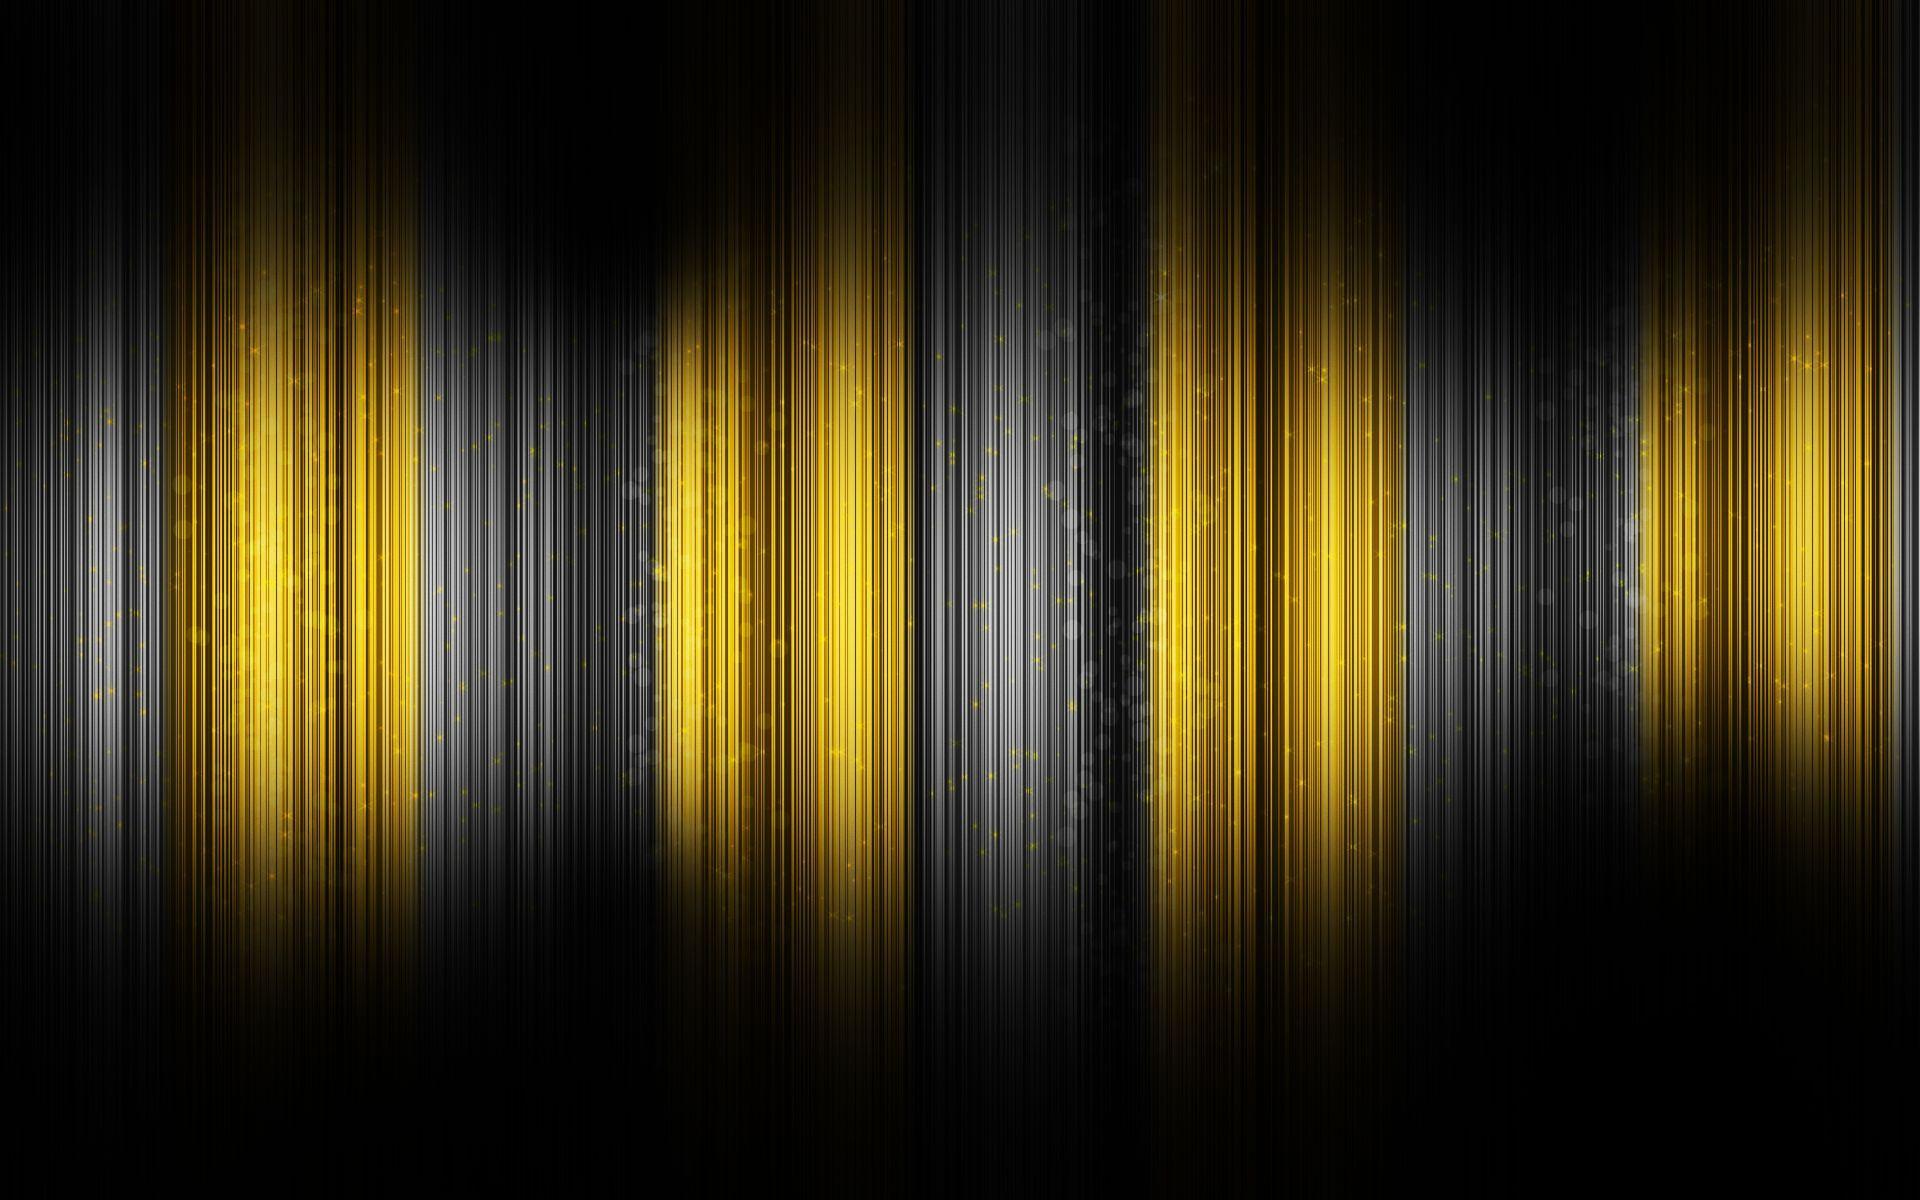 Black and Yellow Abstract Wallpapers - Top Free Black and Yellow